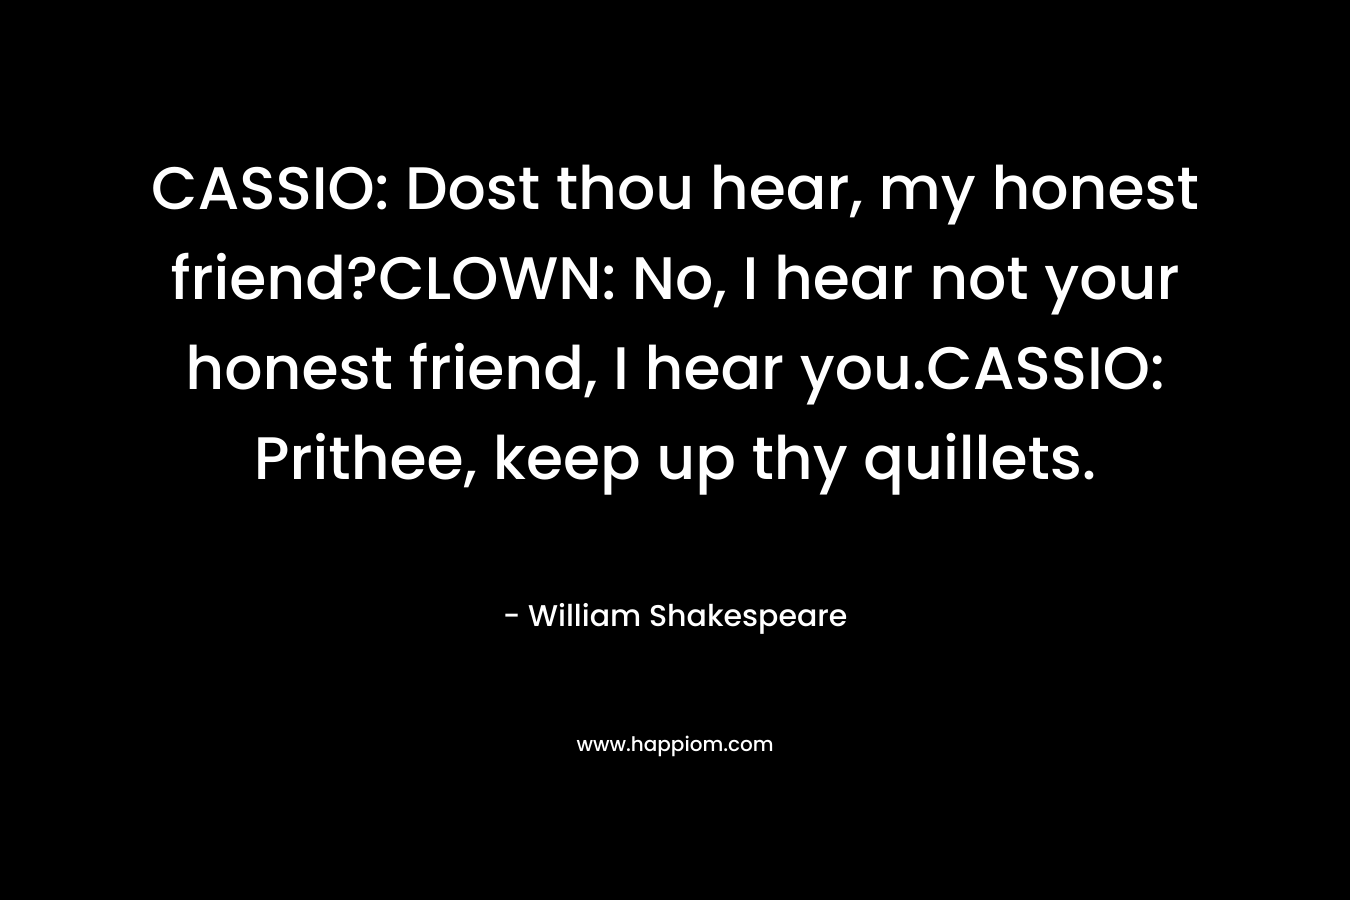 CASSIO: Dost thou hear, my honest friend?CLOWN: No, I hear not your honest friend, I hear you.CASSIO: Prithee, keep up thy quillets.